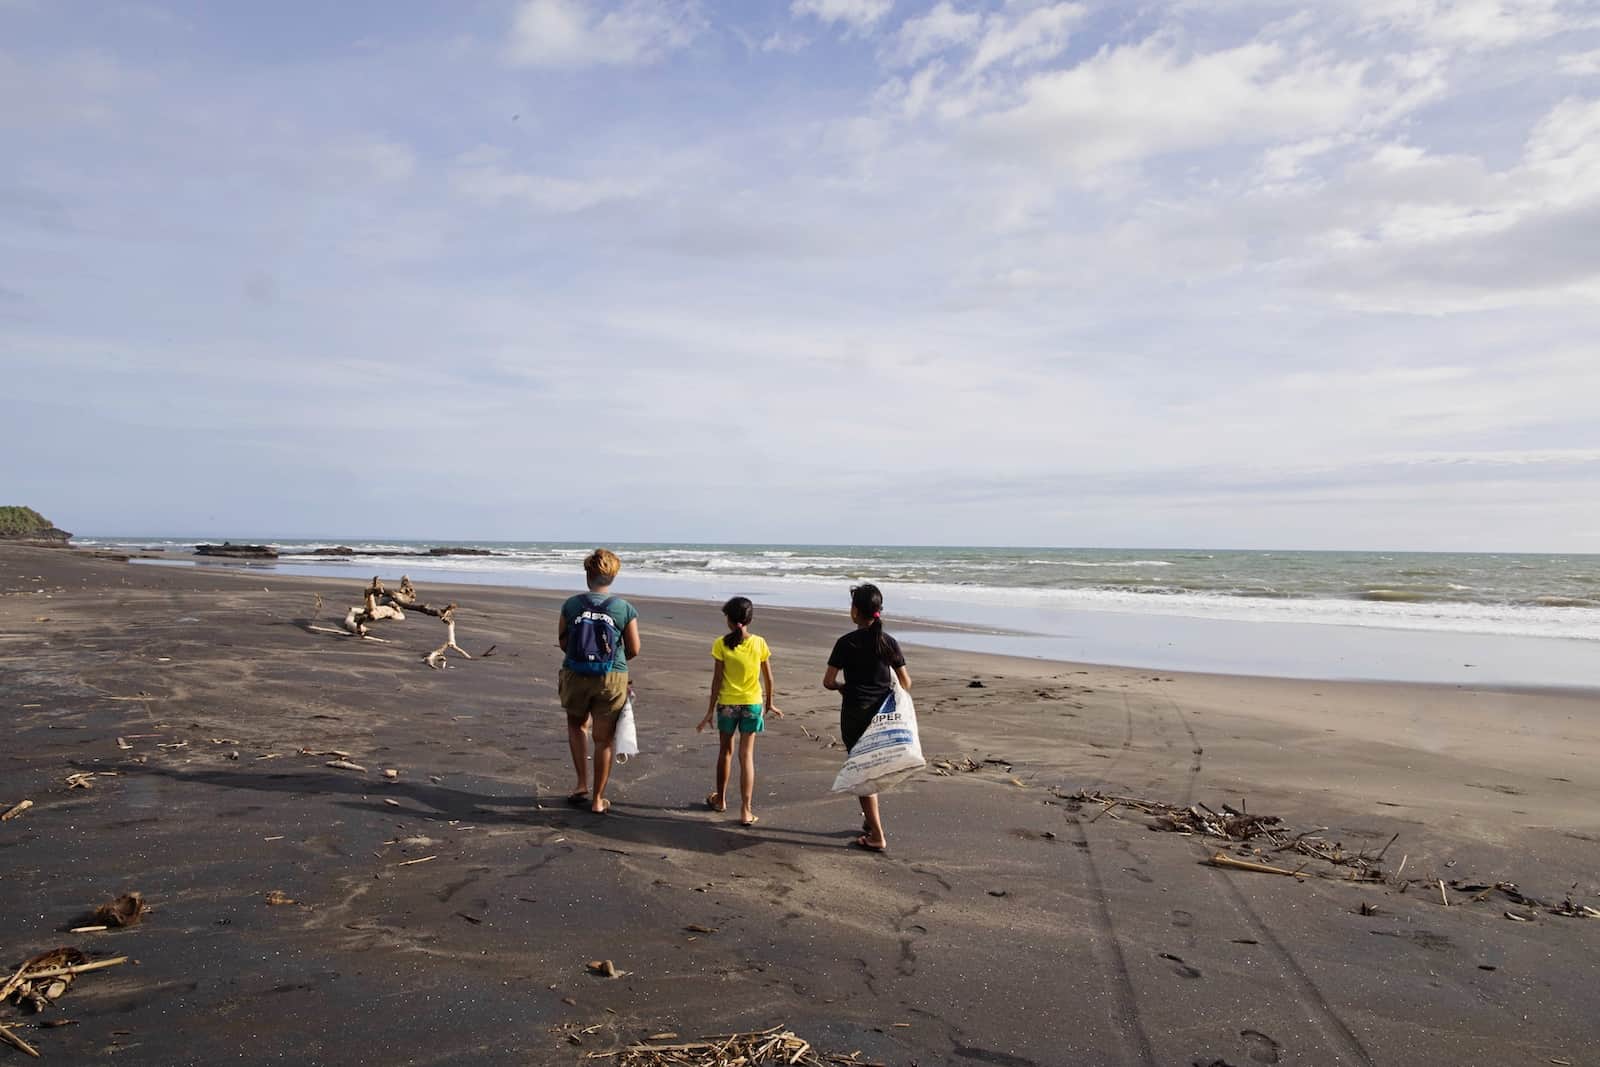 A woman walks down a wide beach with two children, holding bags in which they gather trash.